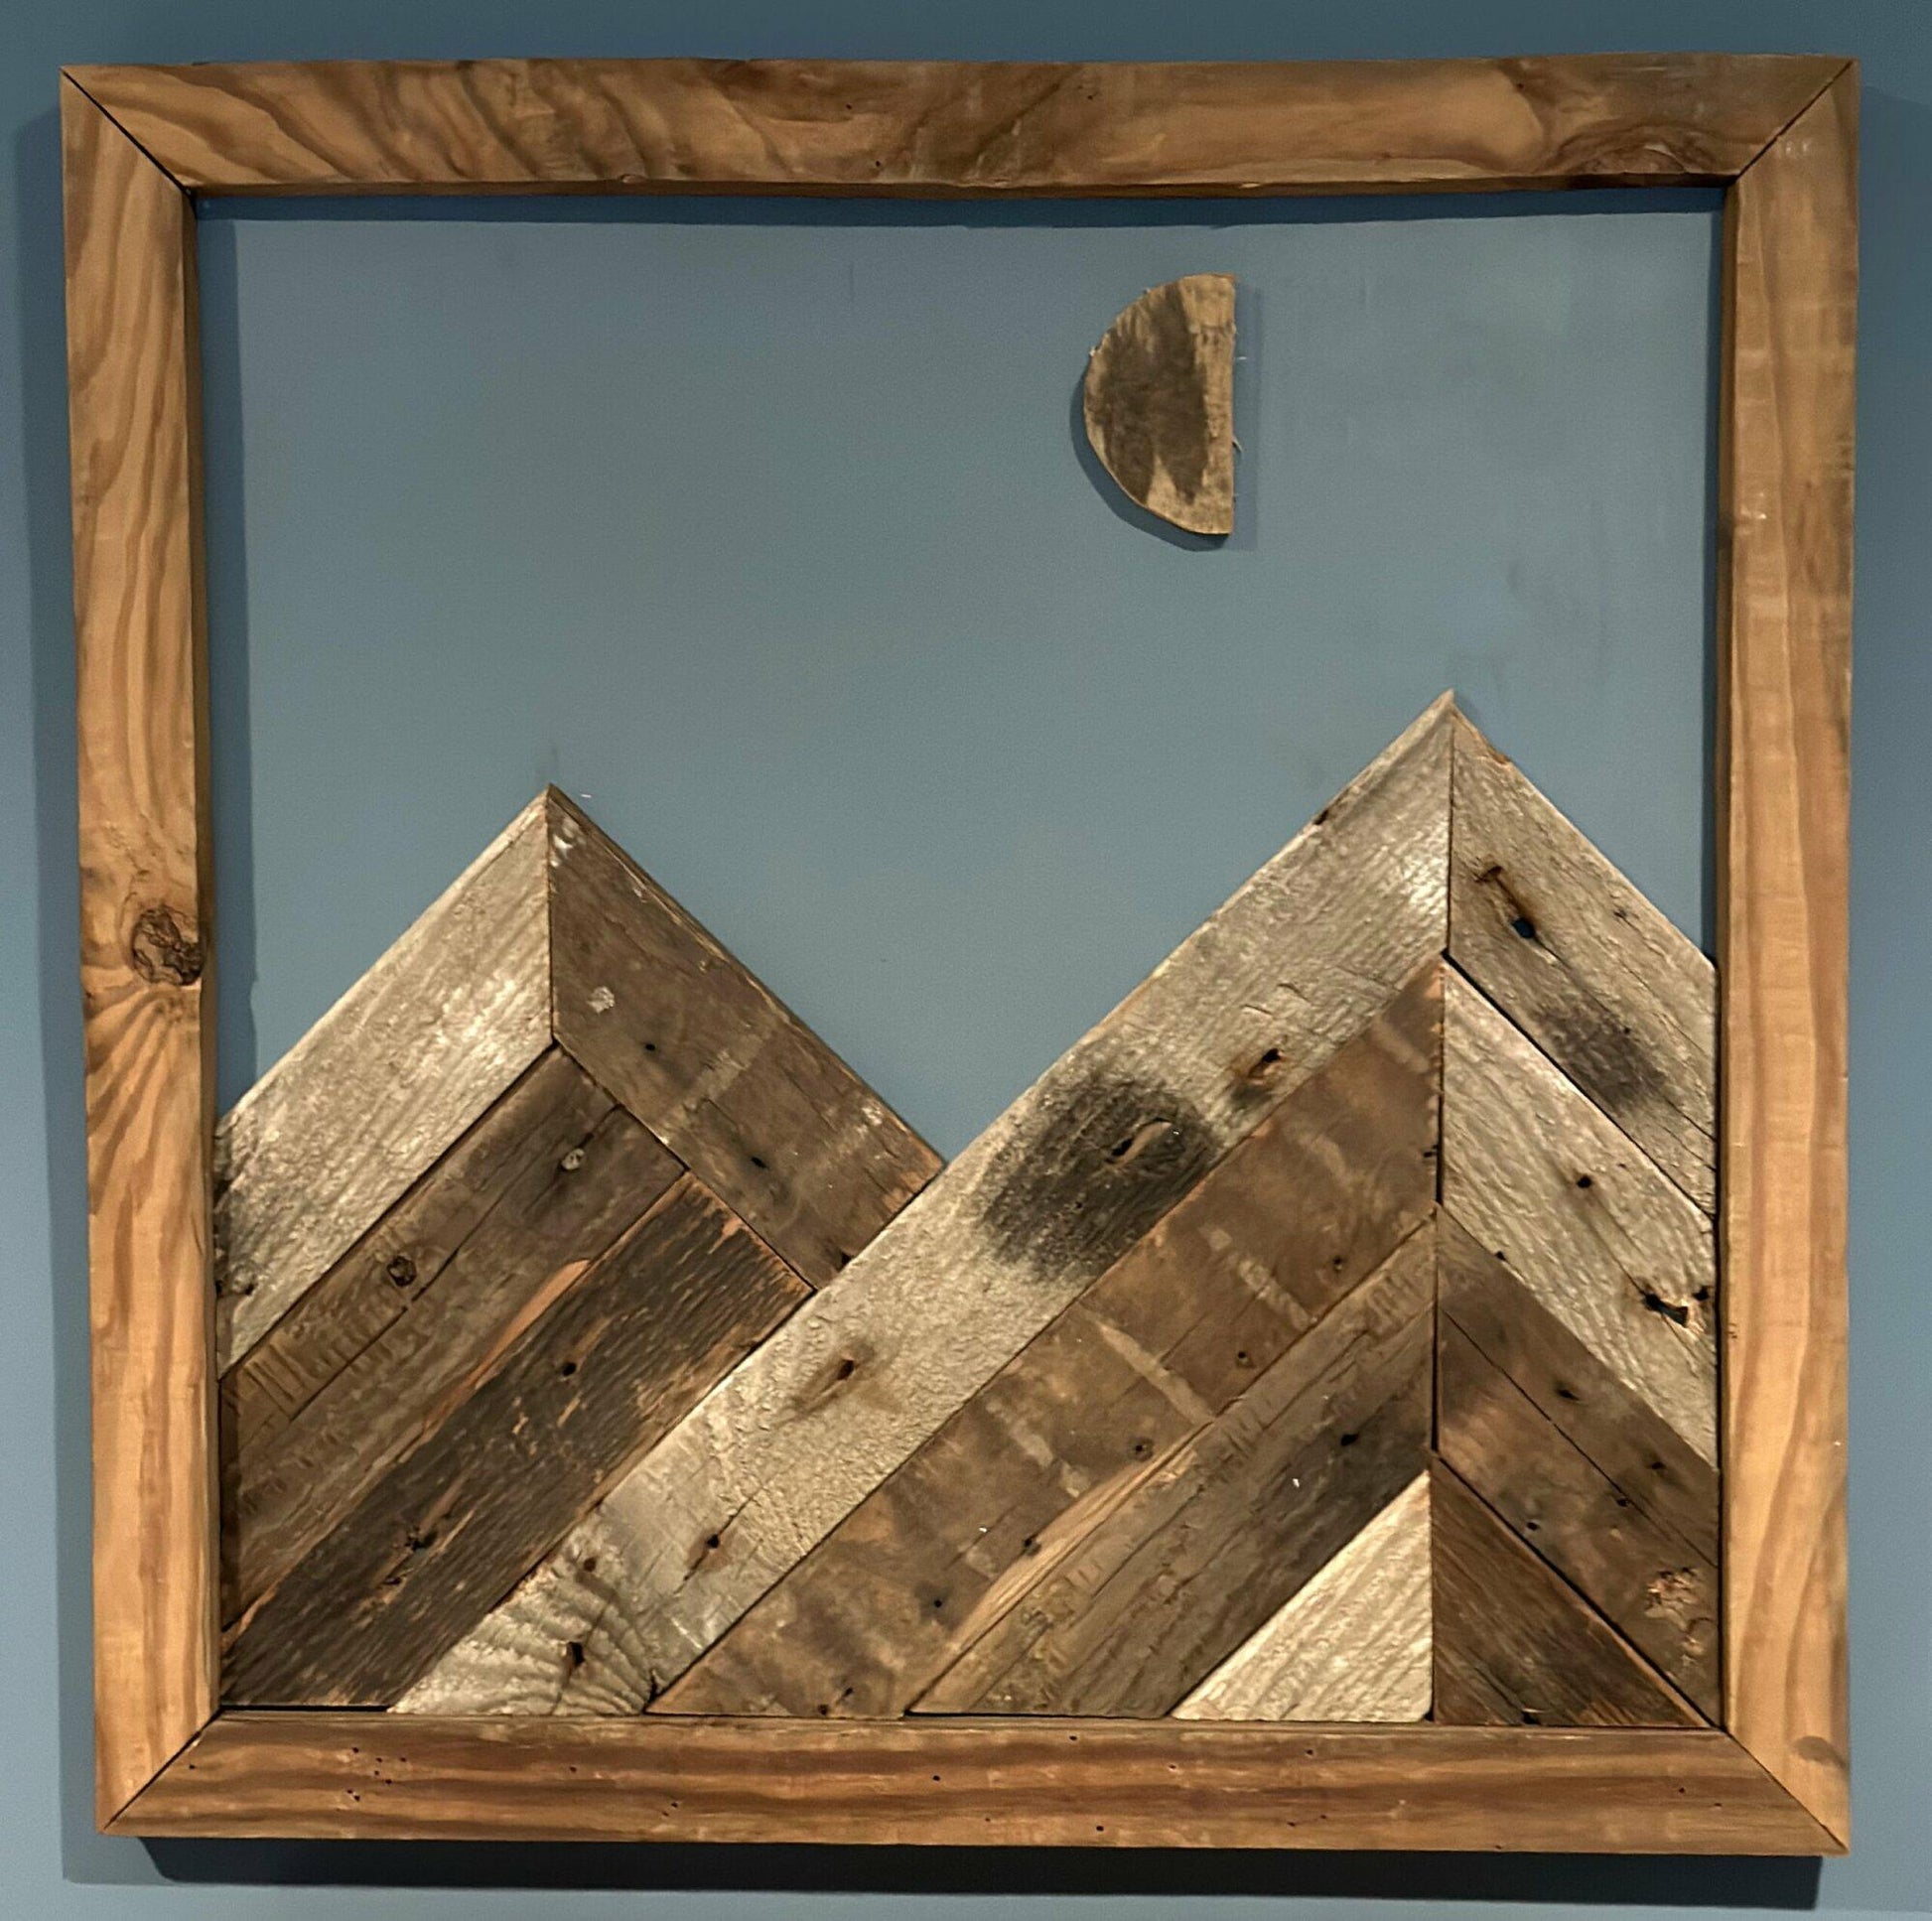 wall decor that looks like two mountains with a moon half full overtop. Mountains, moon, and frame of wall decor all made from reclaimed barnwood. Wood shows grain patterns and other distressed characteristics.